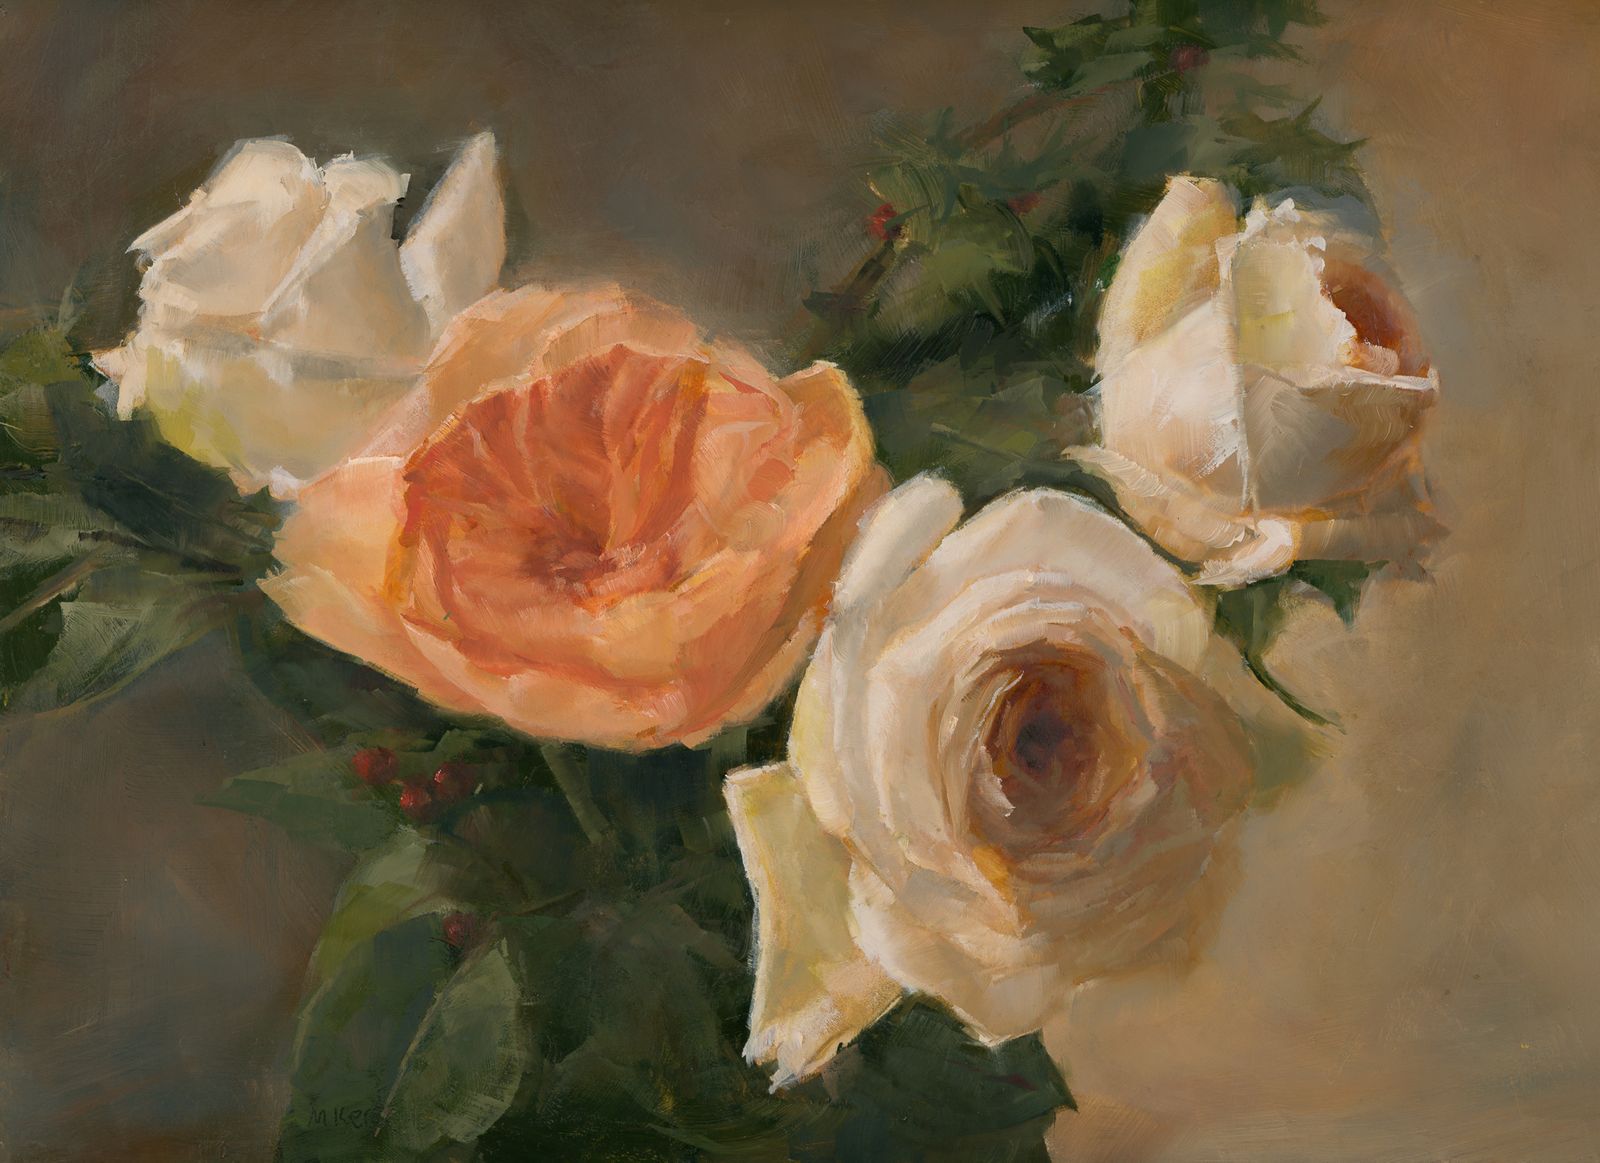 An oil painting of three white and one salmon rose with holly leaves and berries.